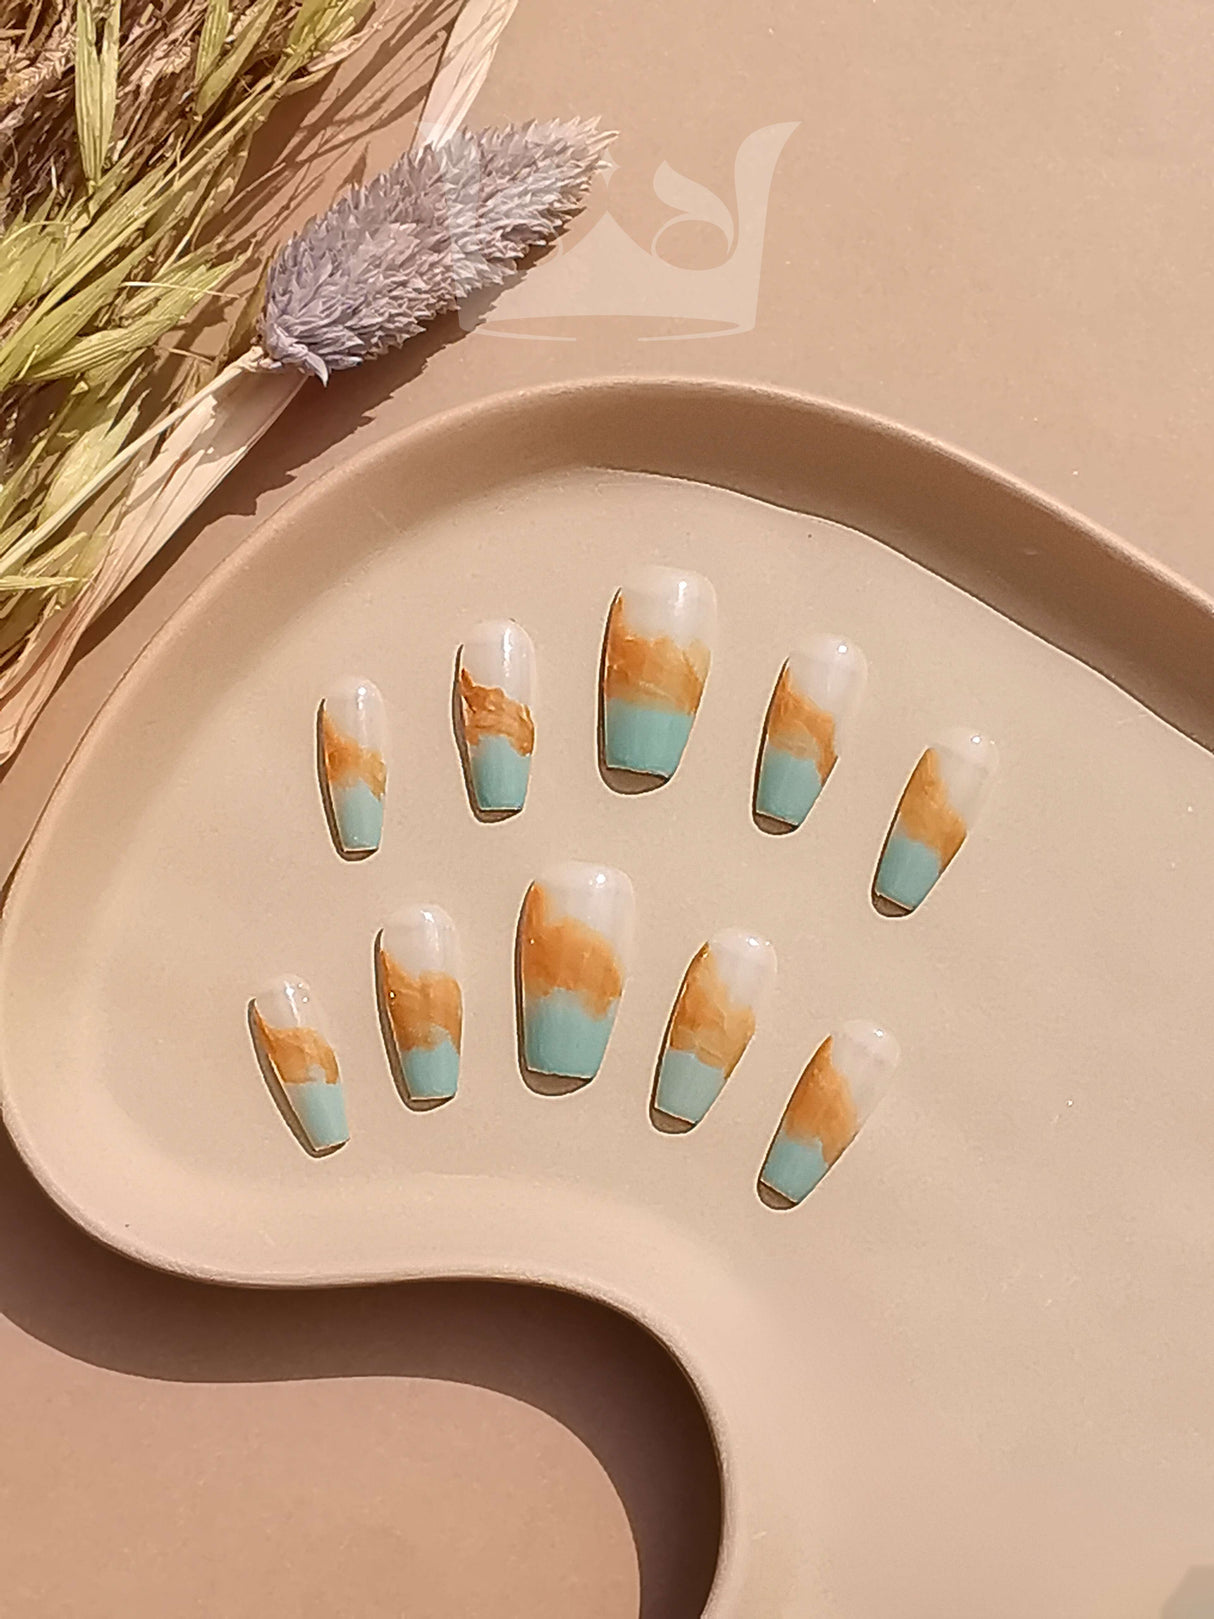 These press-on nails are a fashion accessory featuring a marbled effect in shades of turquoise, brown, and white. They have a square shape and a neutral-toned surface.